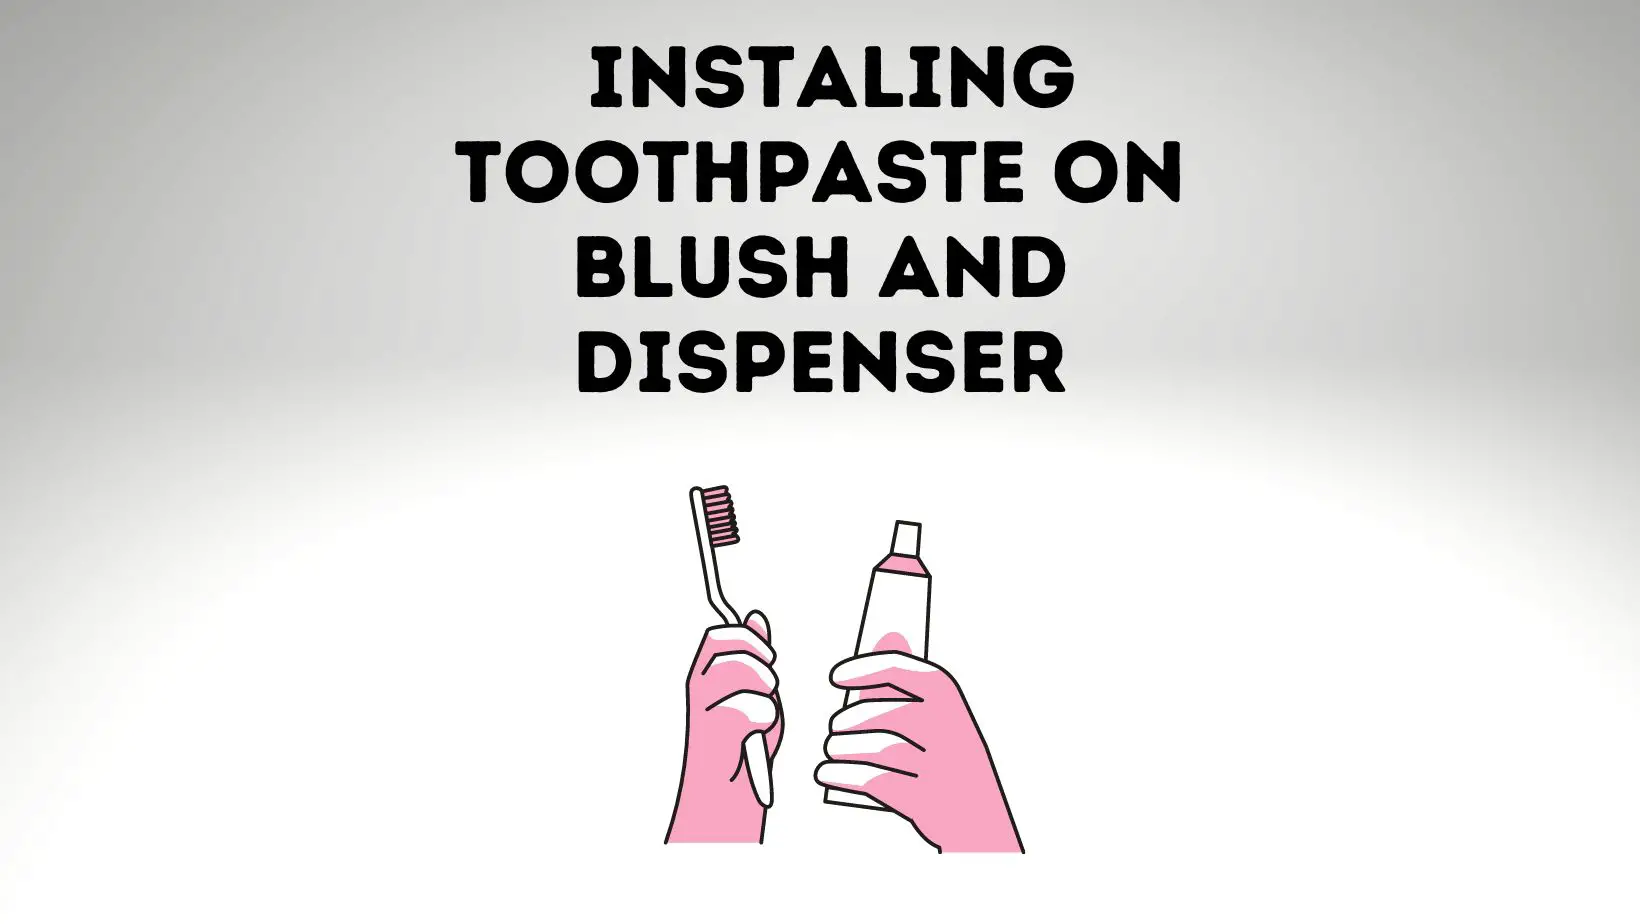 How To Install Toothpaste On Brush And Dispenser?